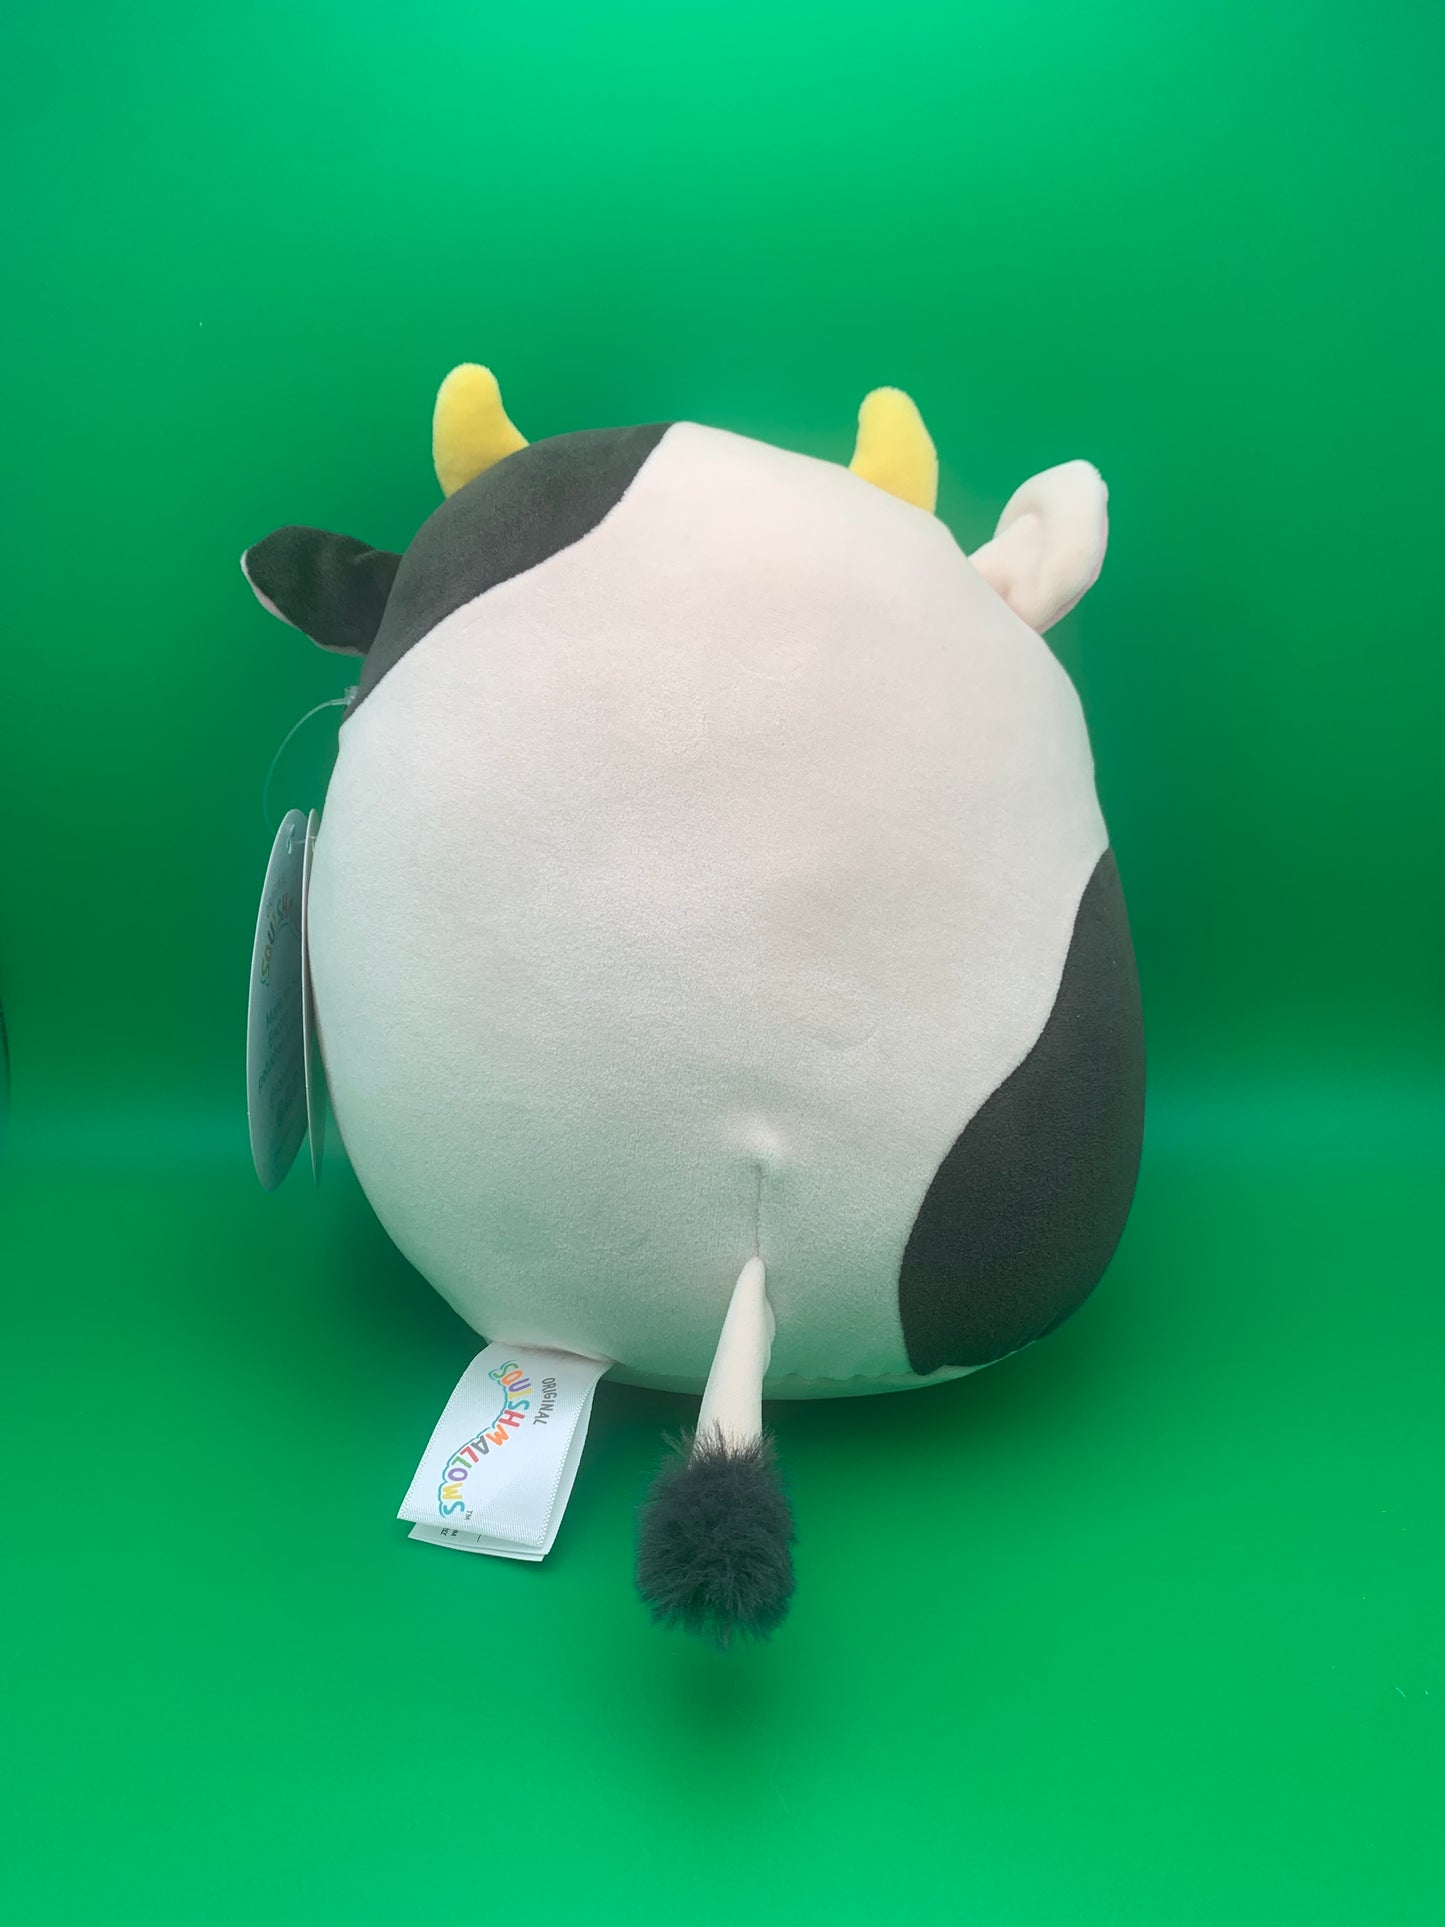 Squishmallow Connor the Cow 7.5 inch